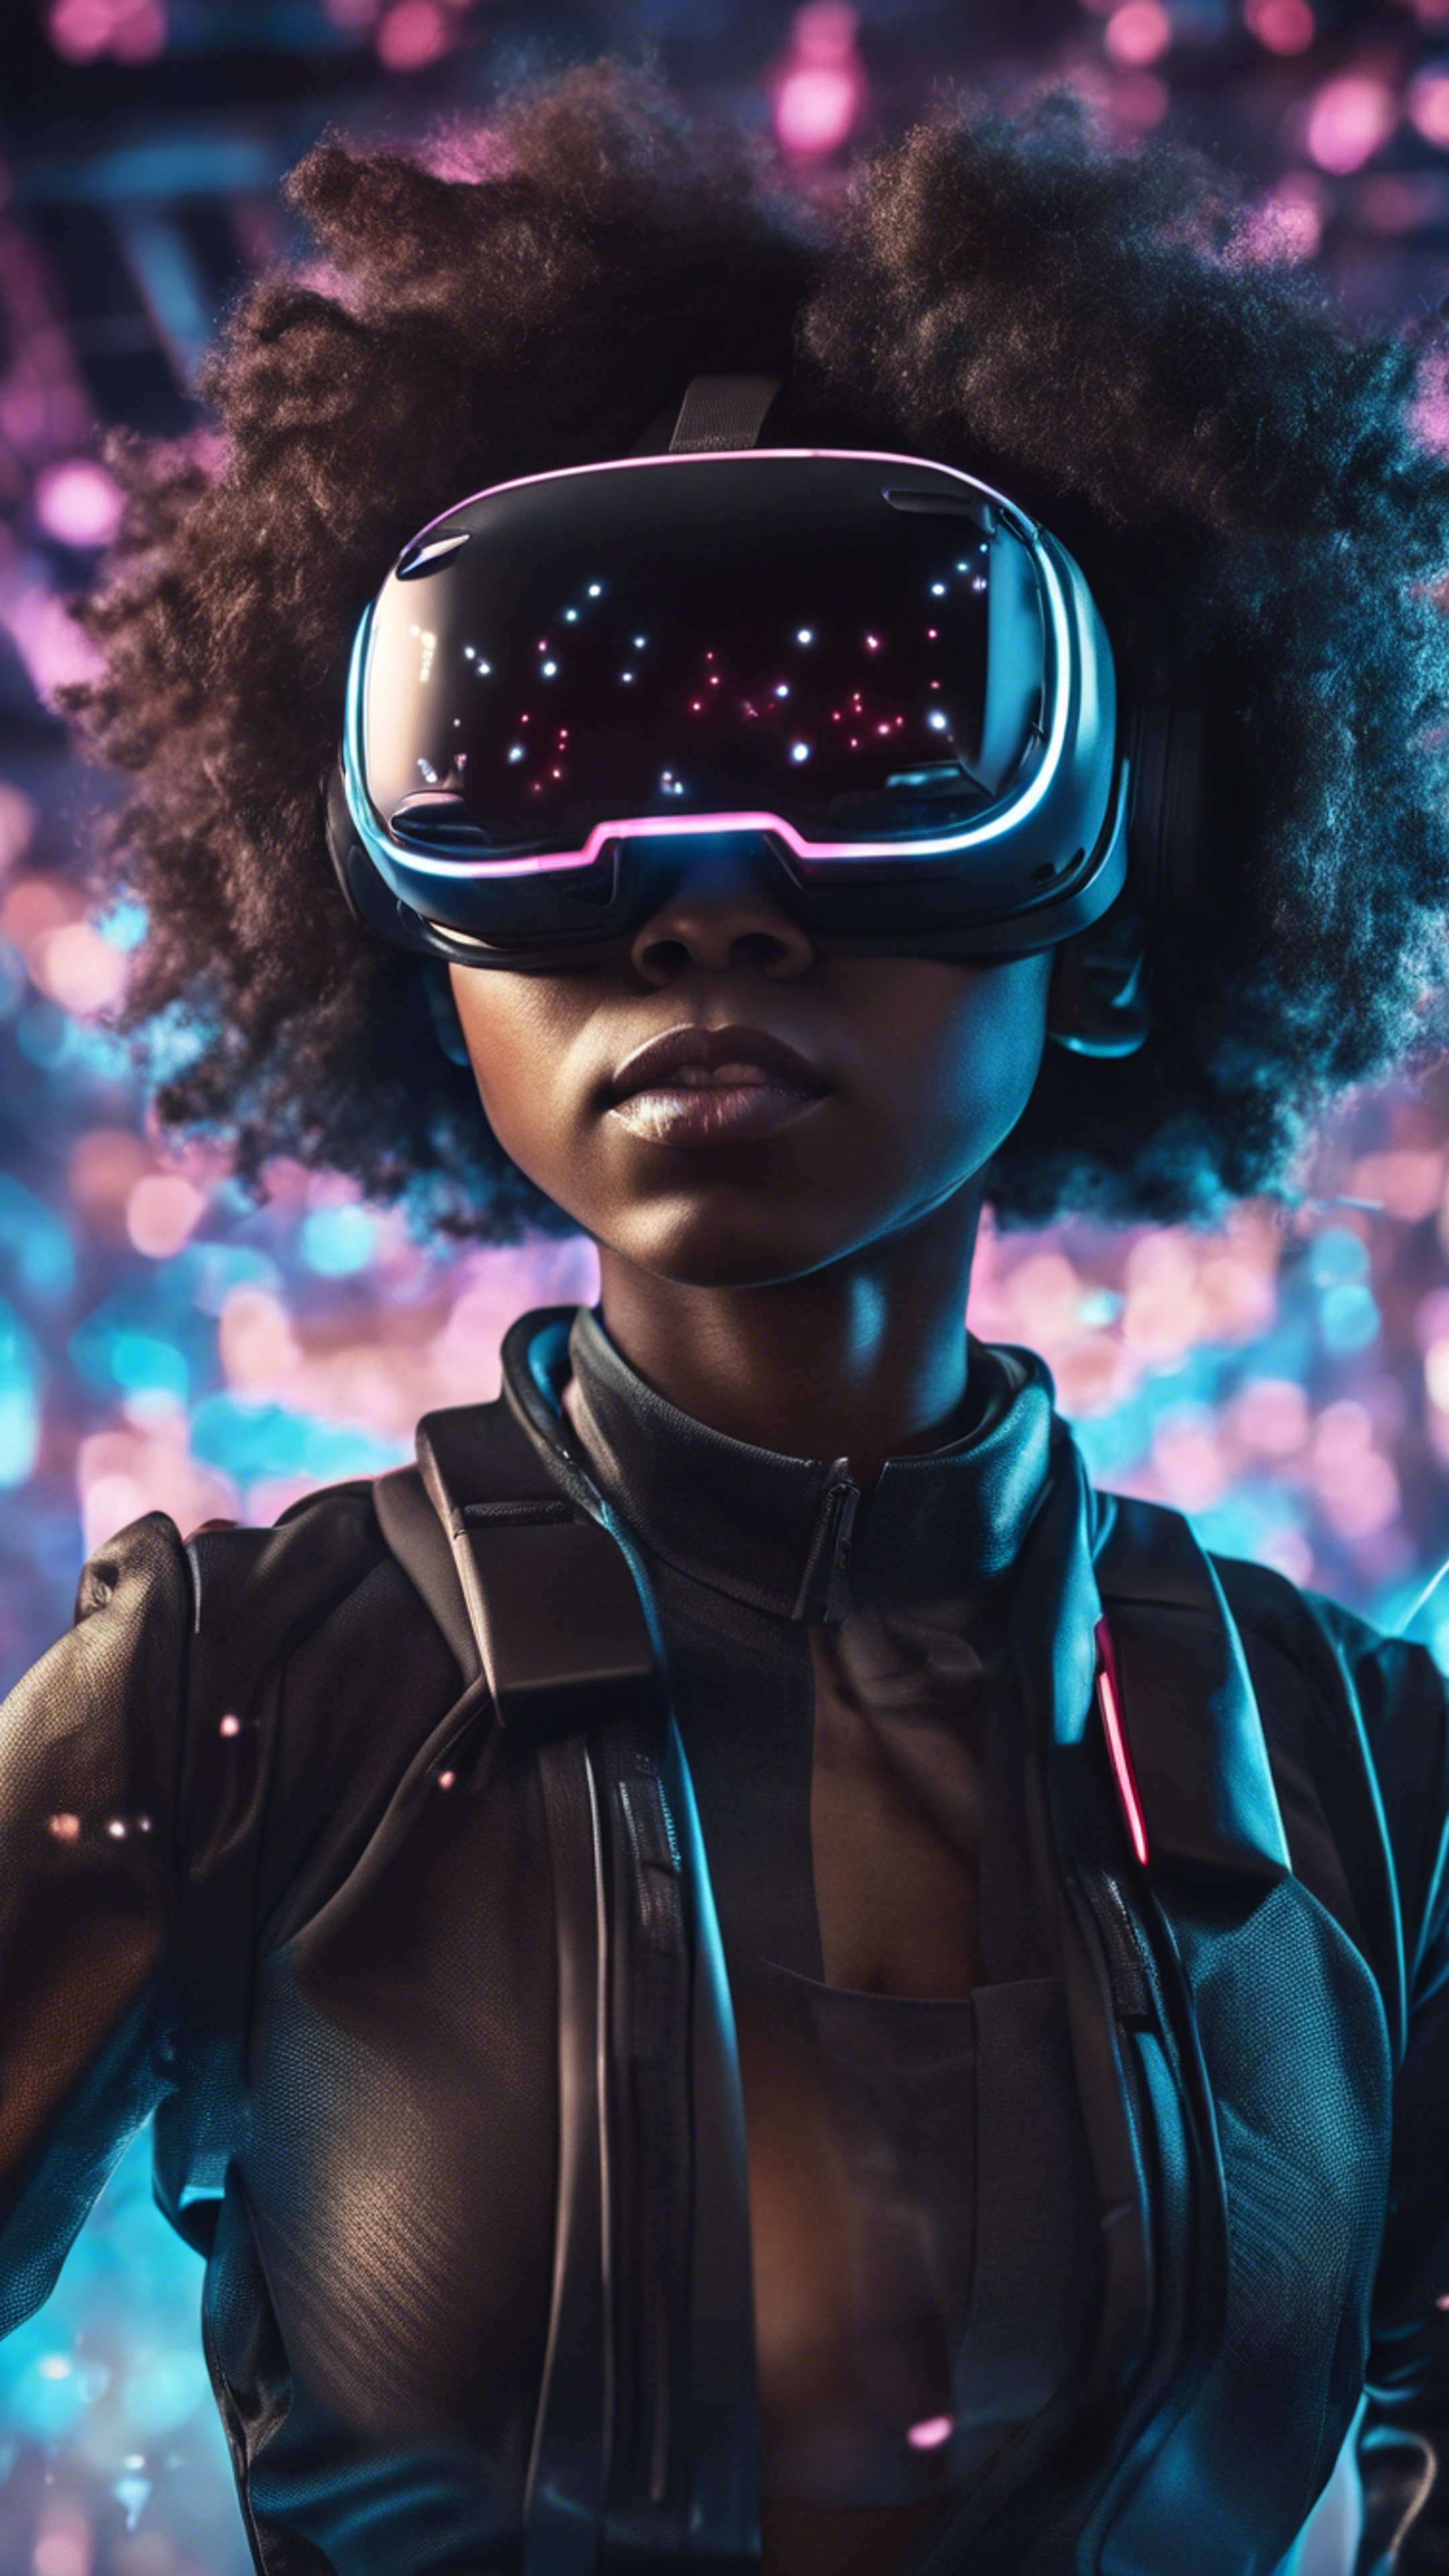 A black girl wearing a virtual reality headset completely immersed in a futuristic cyberspace. Tapet[0f80f55163a8478e8707]